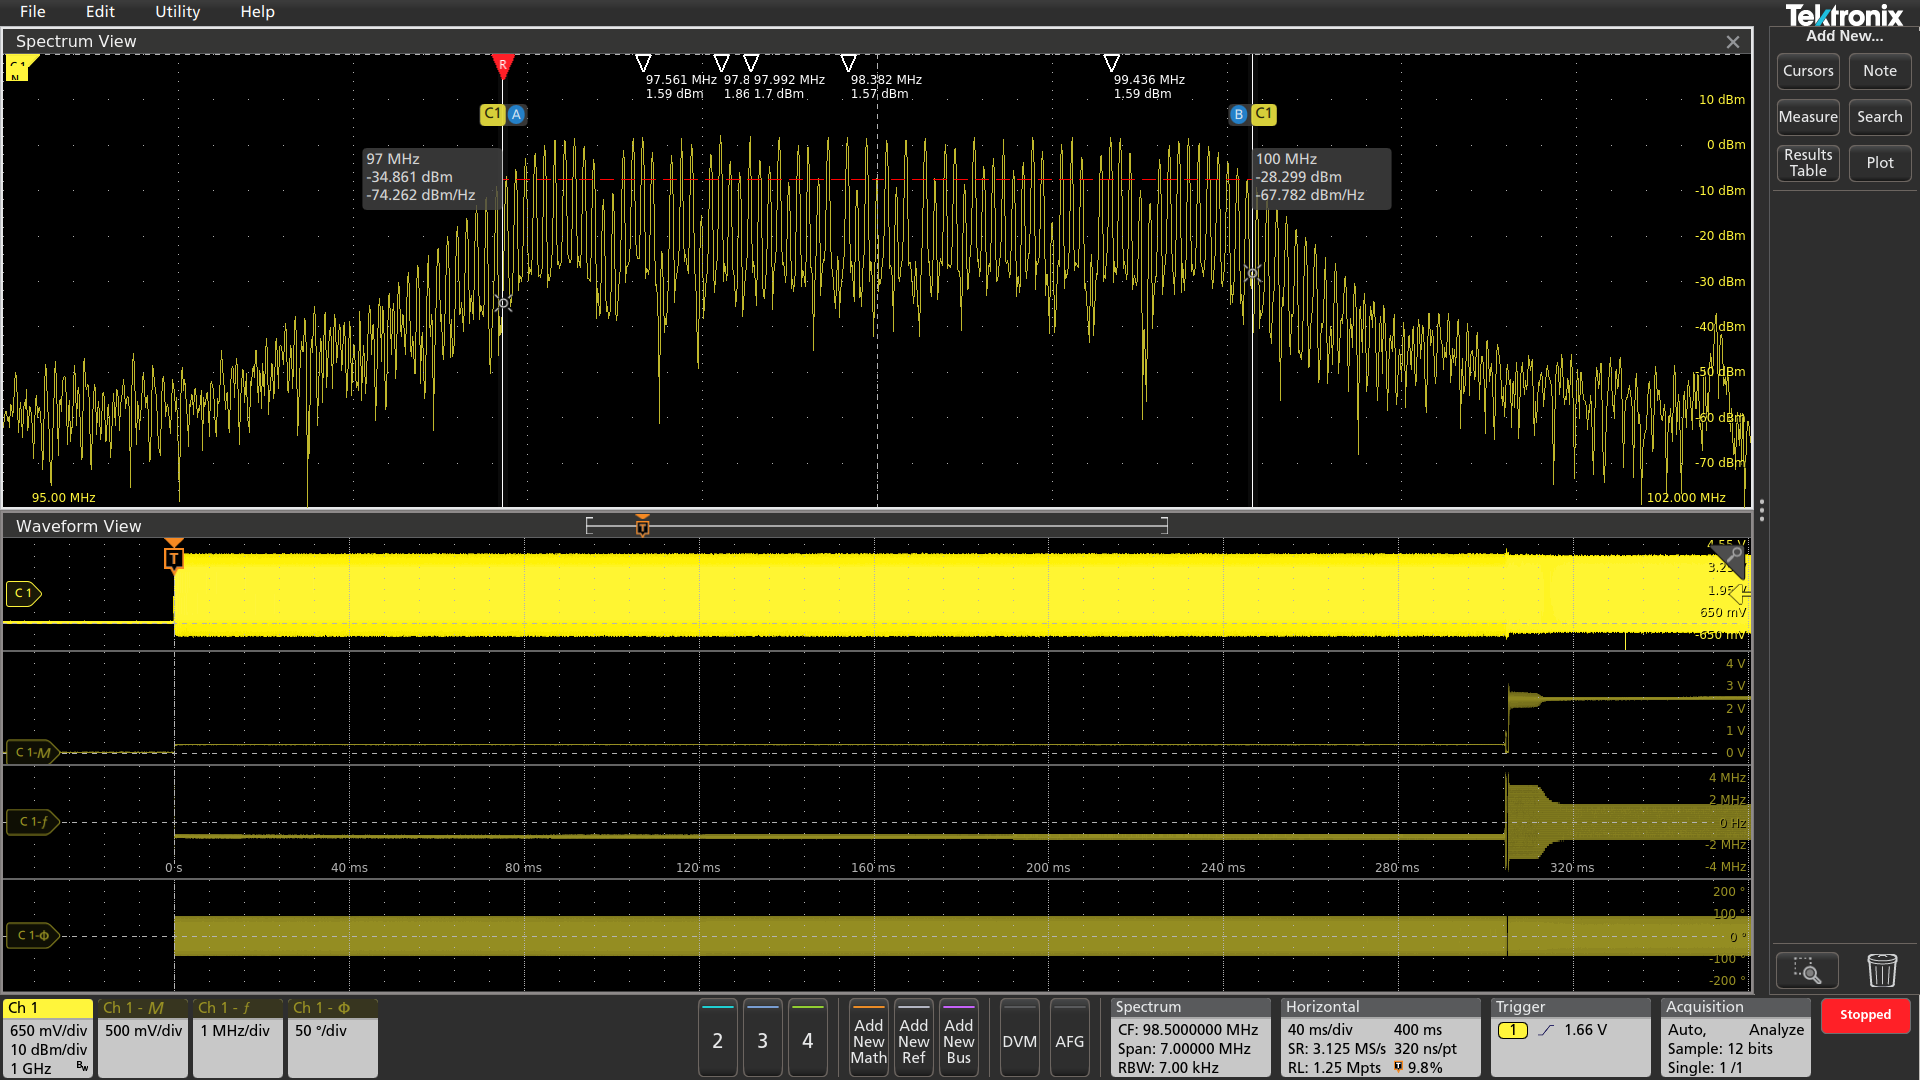 New Rf Vs Time Waveforms In Spectrum View What Are They And What Can They Do For You Tektronix